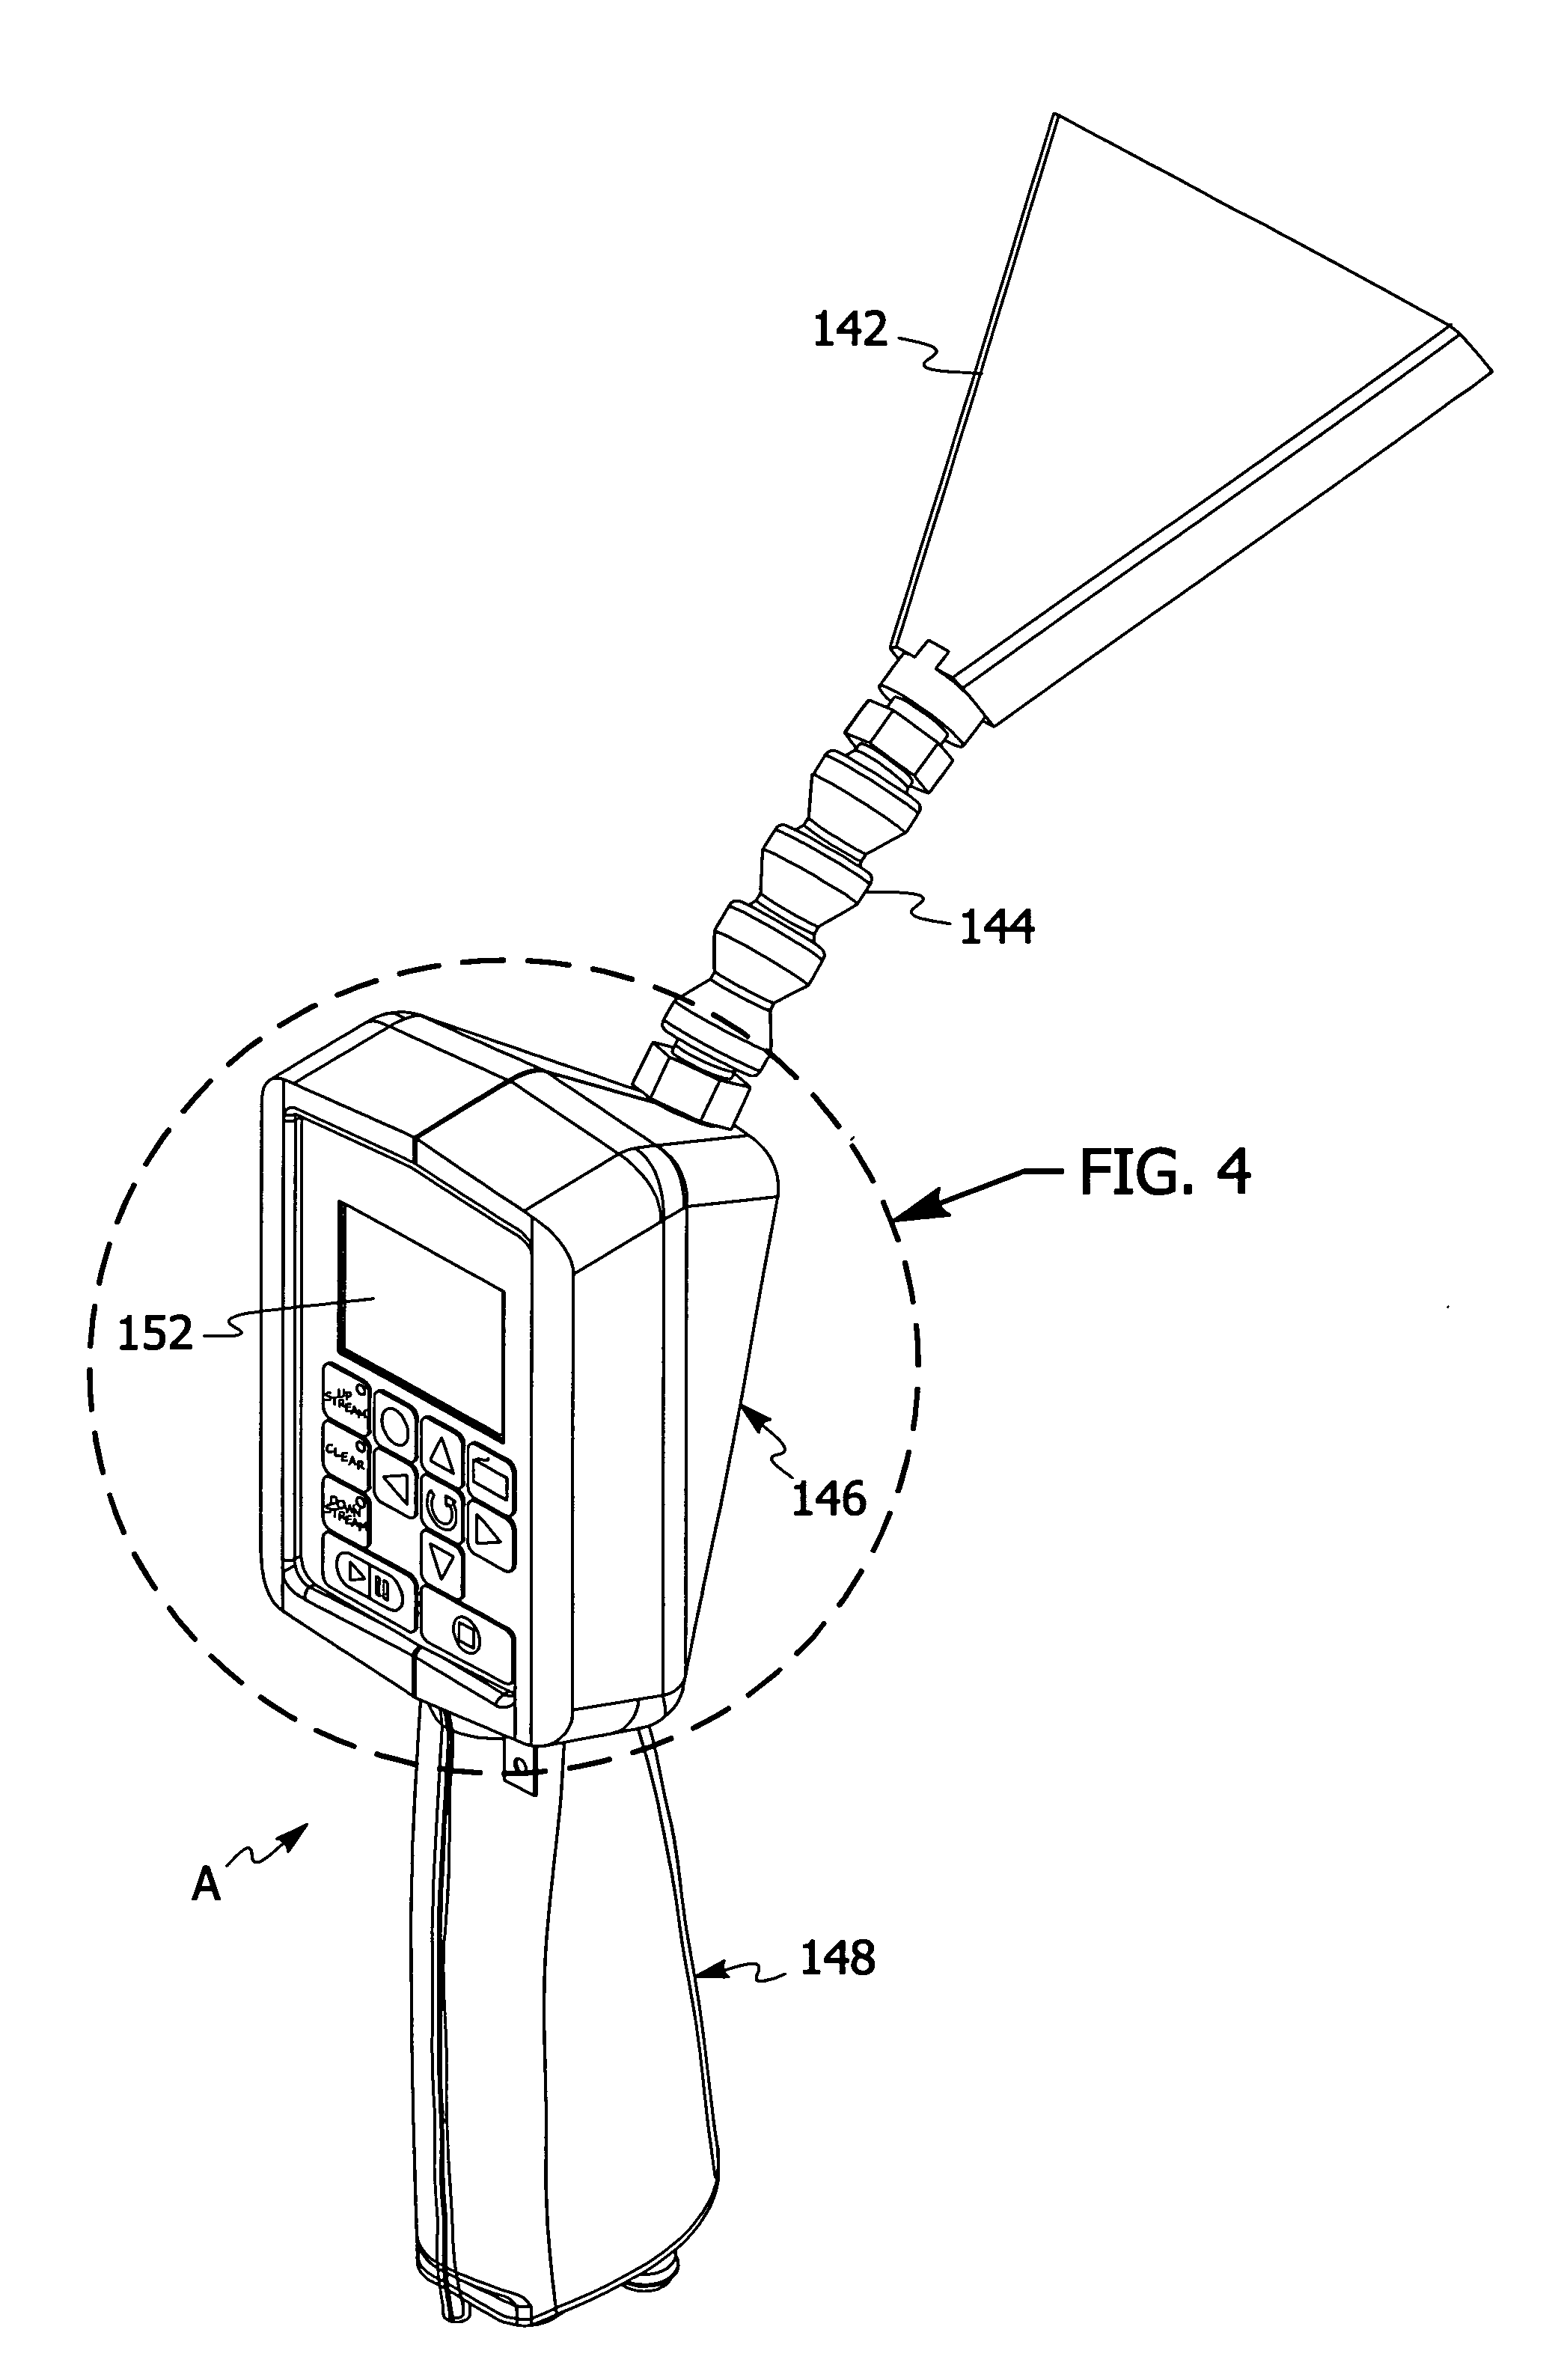 Apparatus for testing a filter